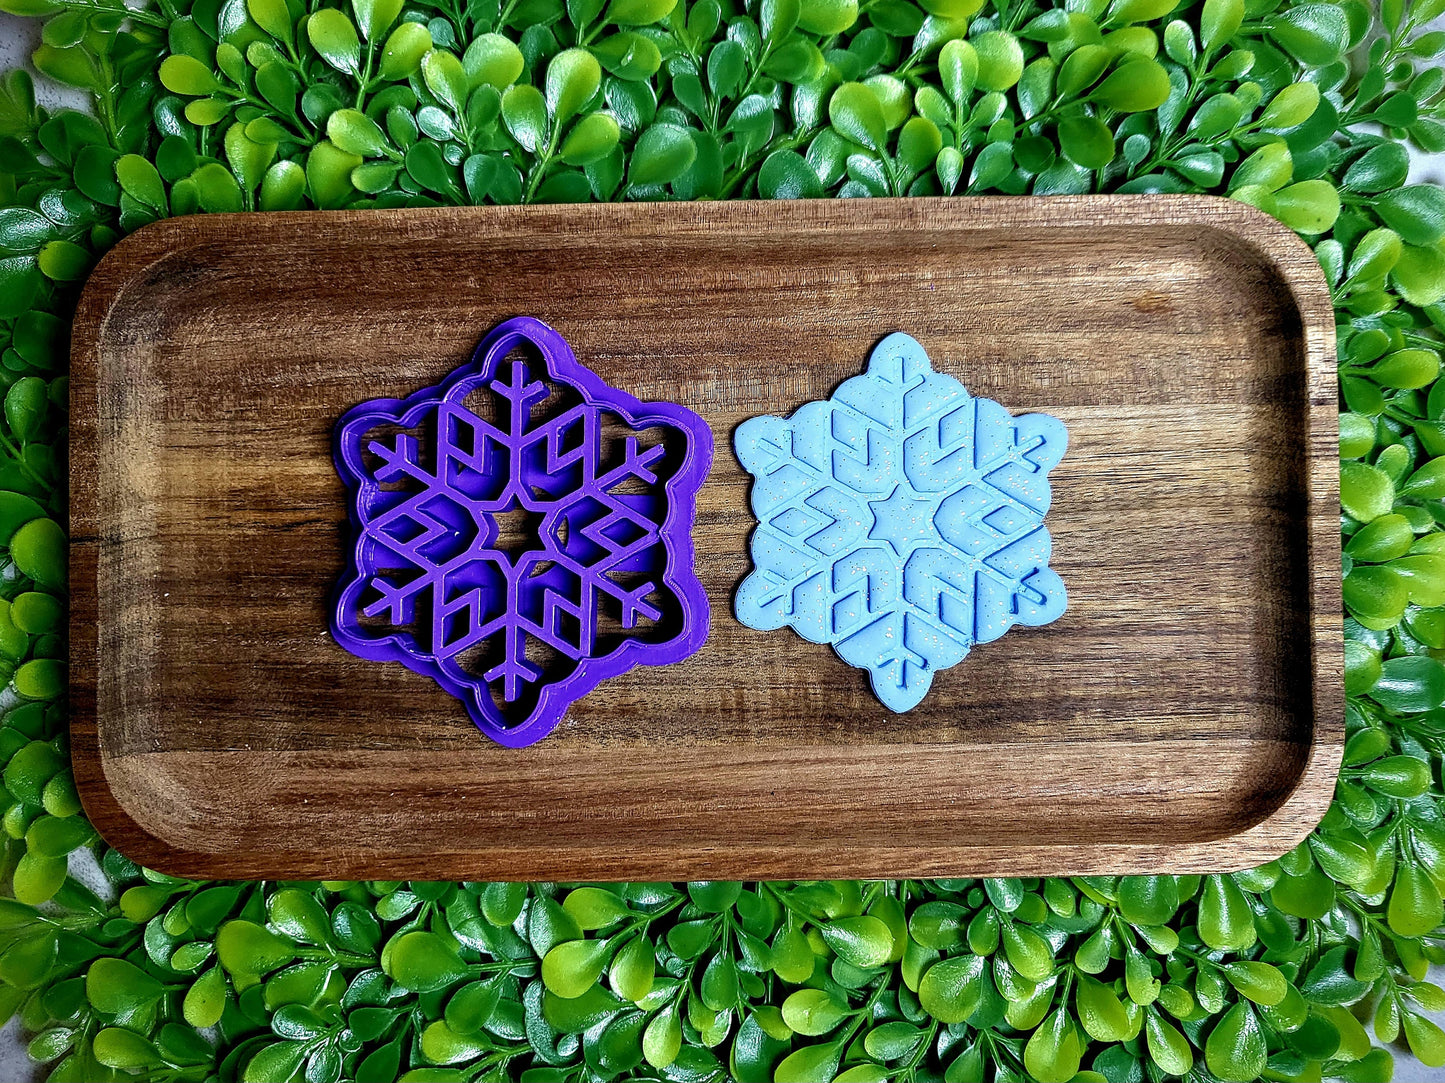 Snowflake 2 Trinket Tray, Dish Polymer Clay Cutter, Ornament Clay Cutter